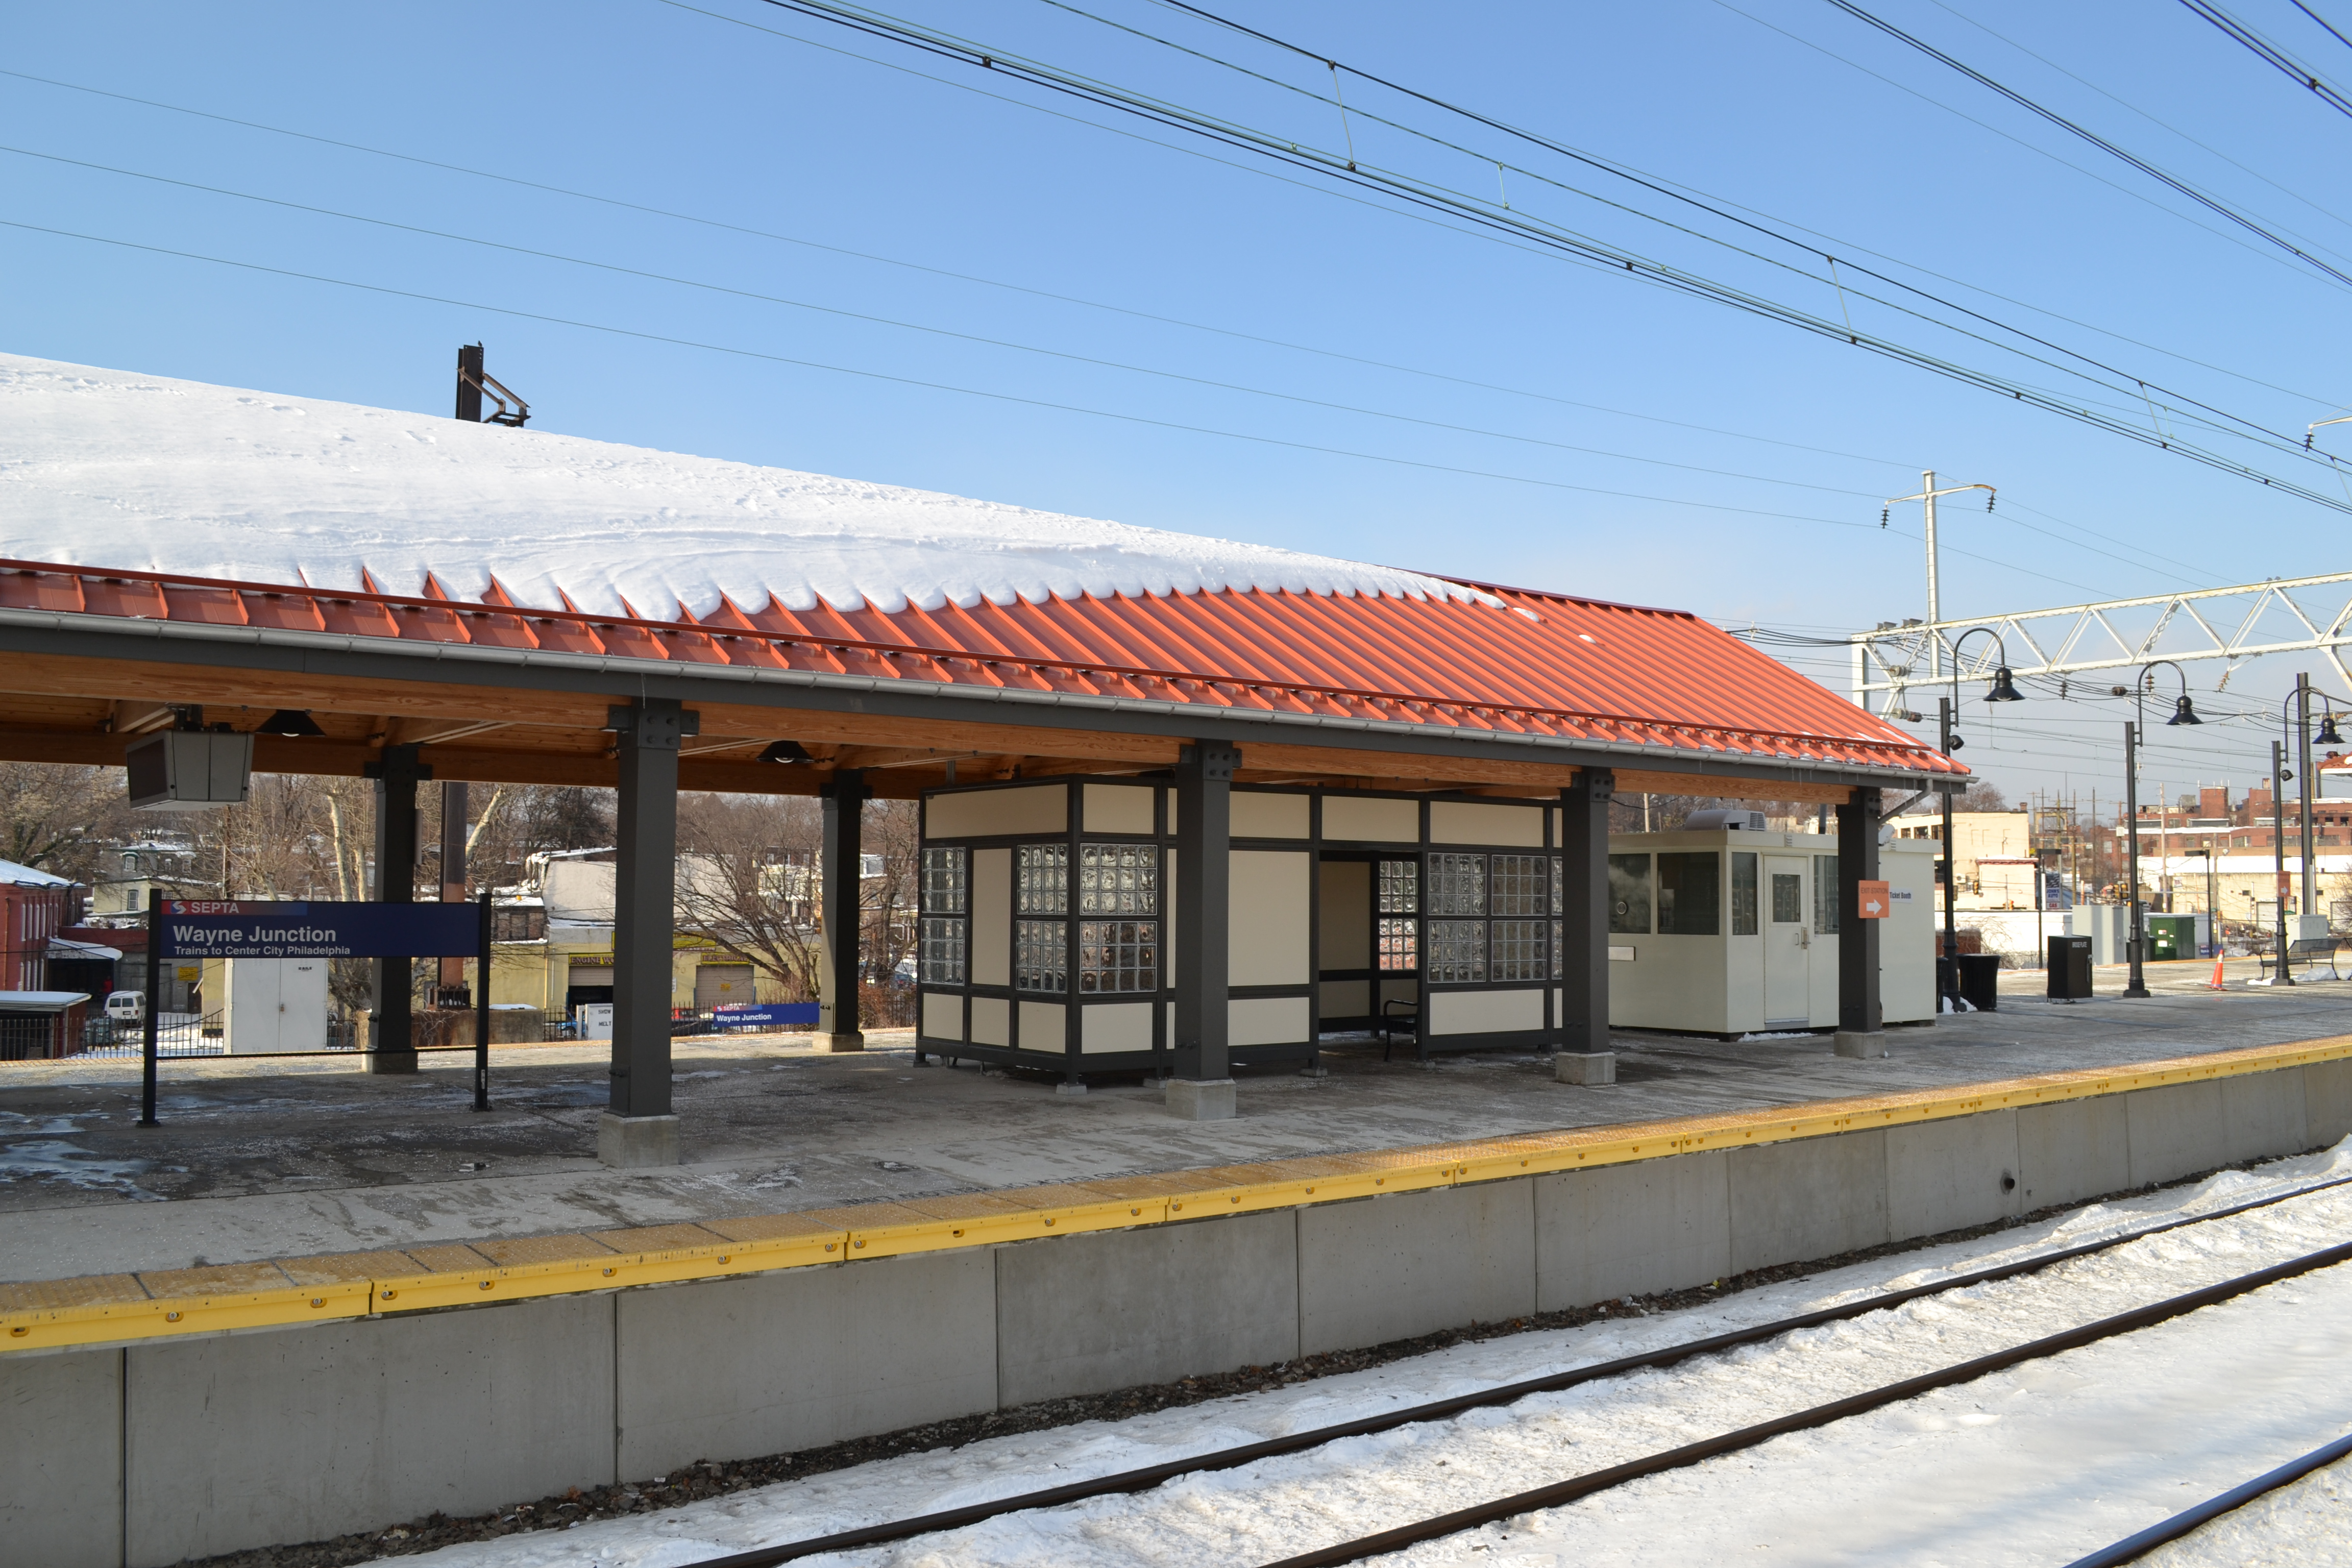 A new passenger canopy was installed next to the station building